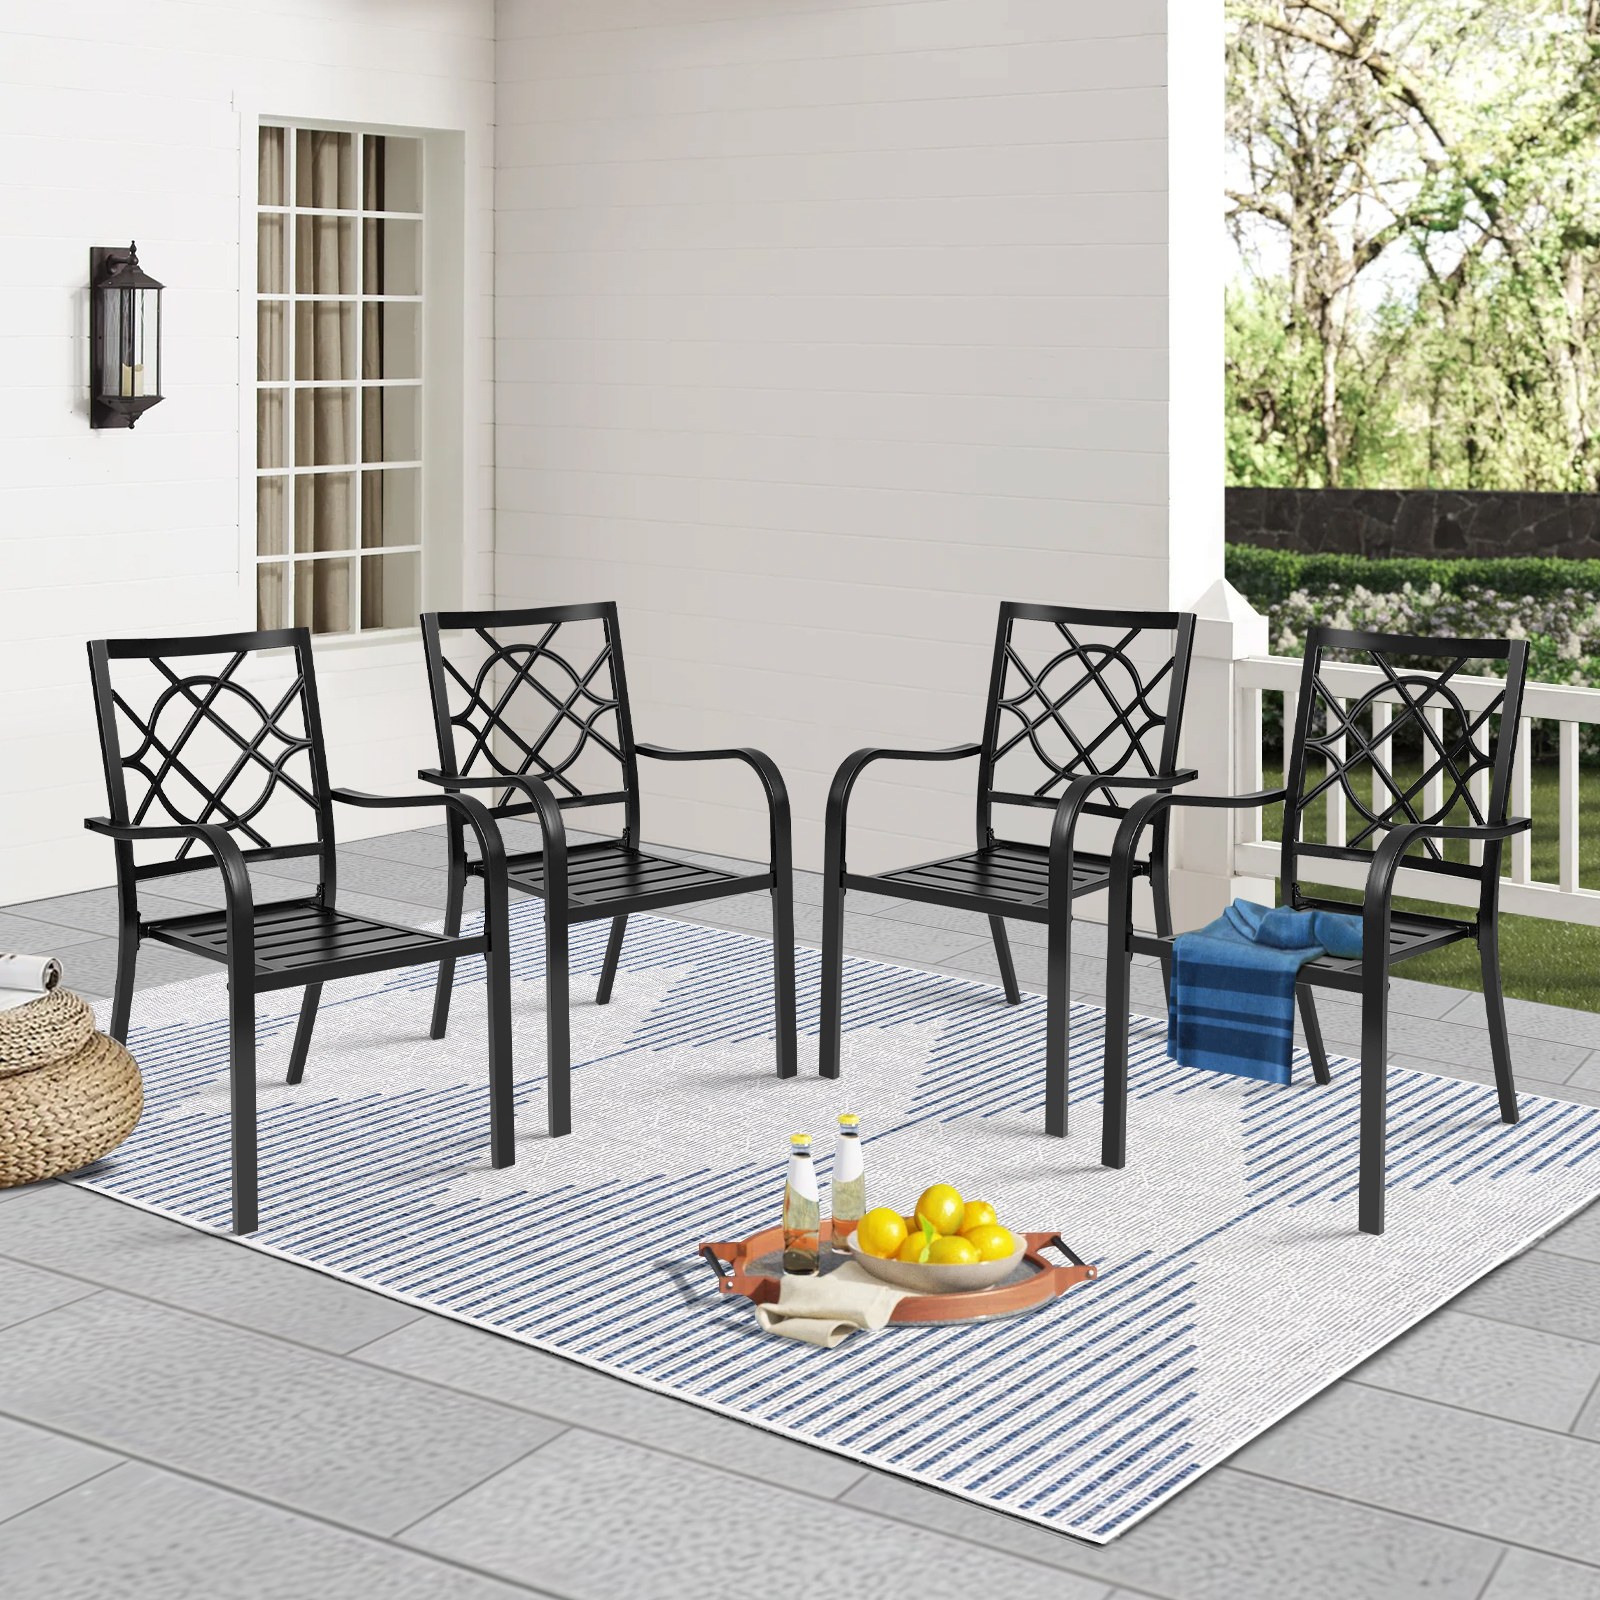 SOLAURA Outdoor Patio Stackable Wrought Iron Dining Chairs Set of 4- Black - image 2 of 7